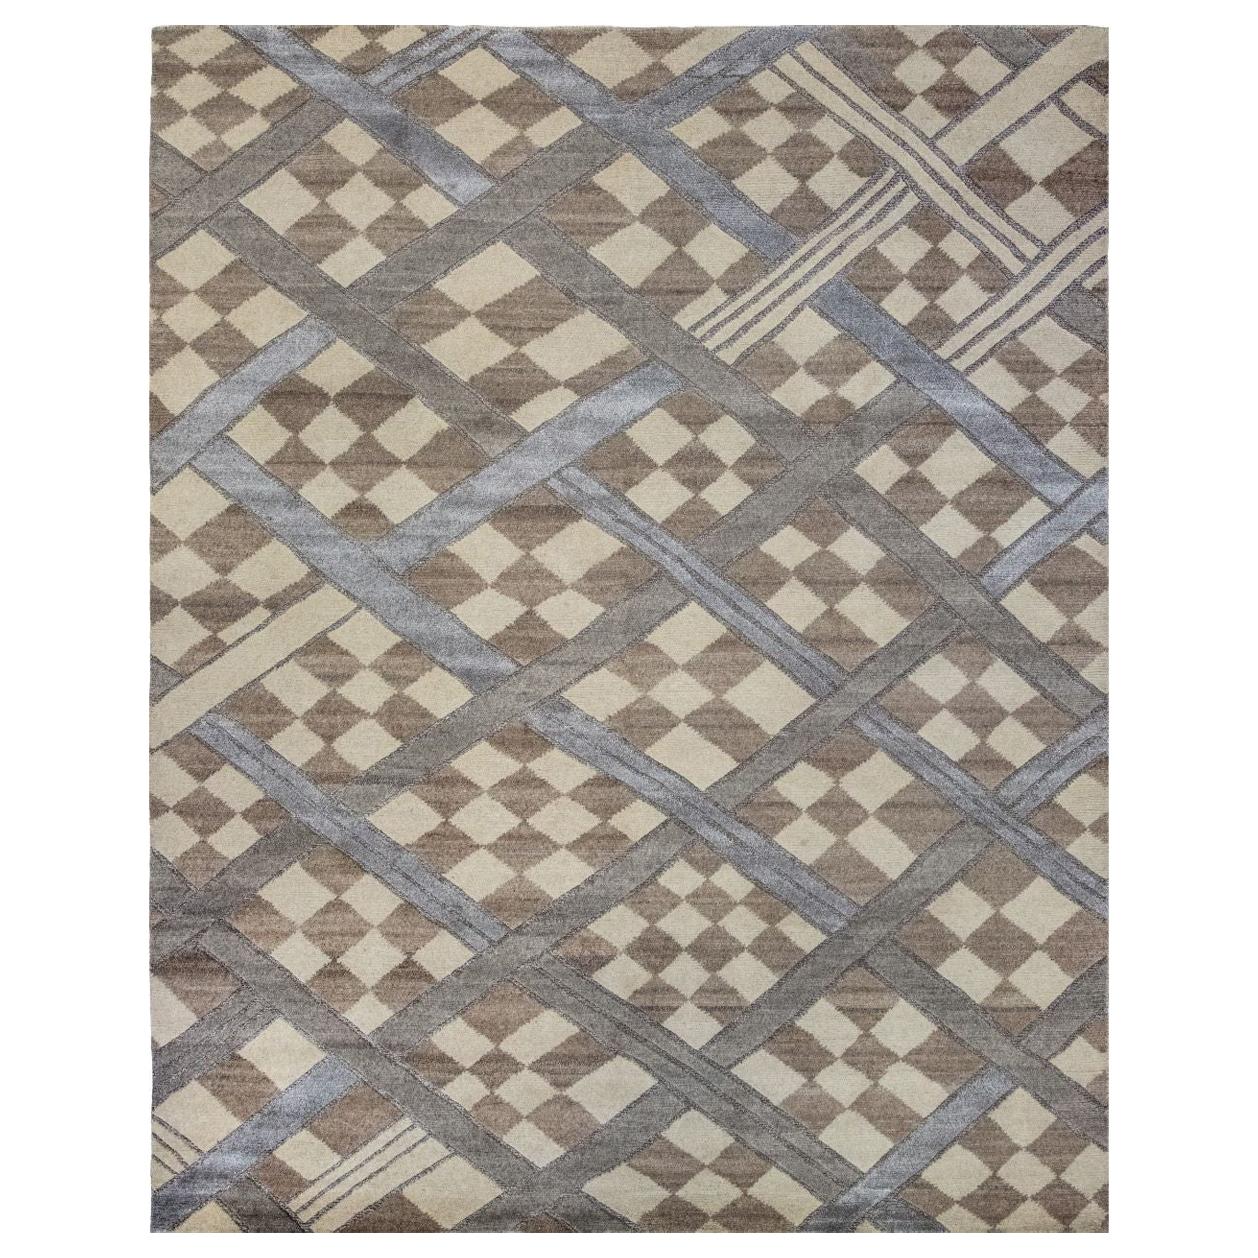 Nazmiyal Collection Modern African Style Retro Rug. 10 ft x 14 ft 